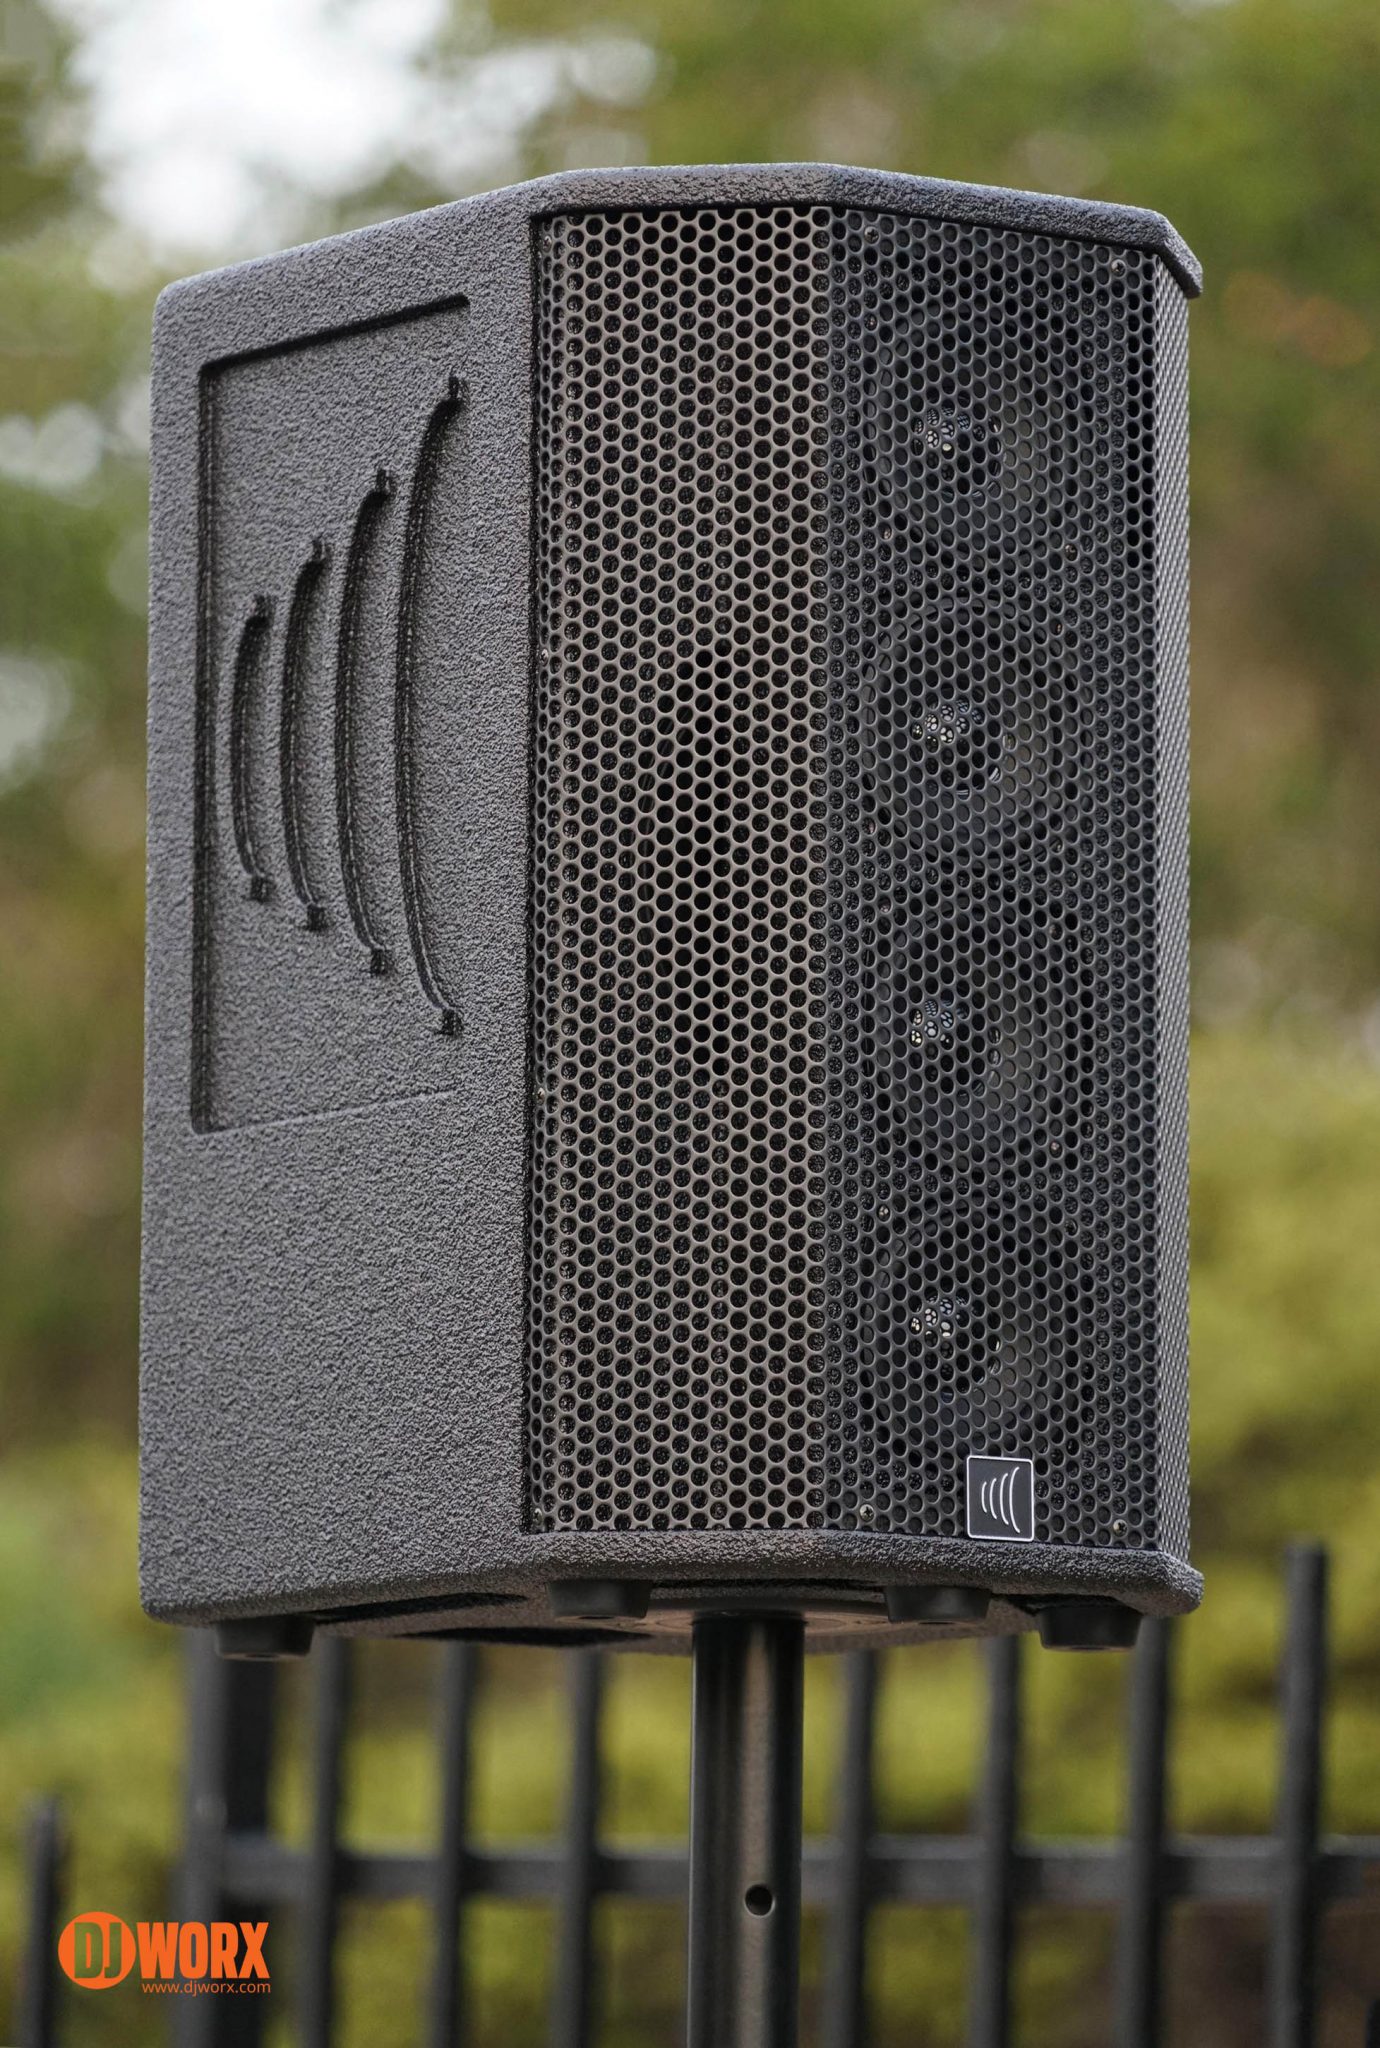 carvin pa speakers